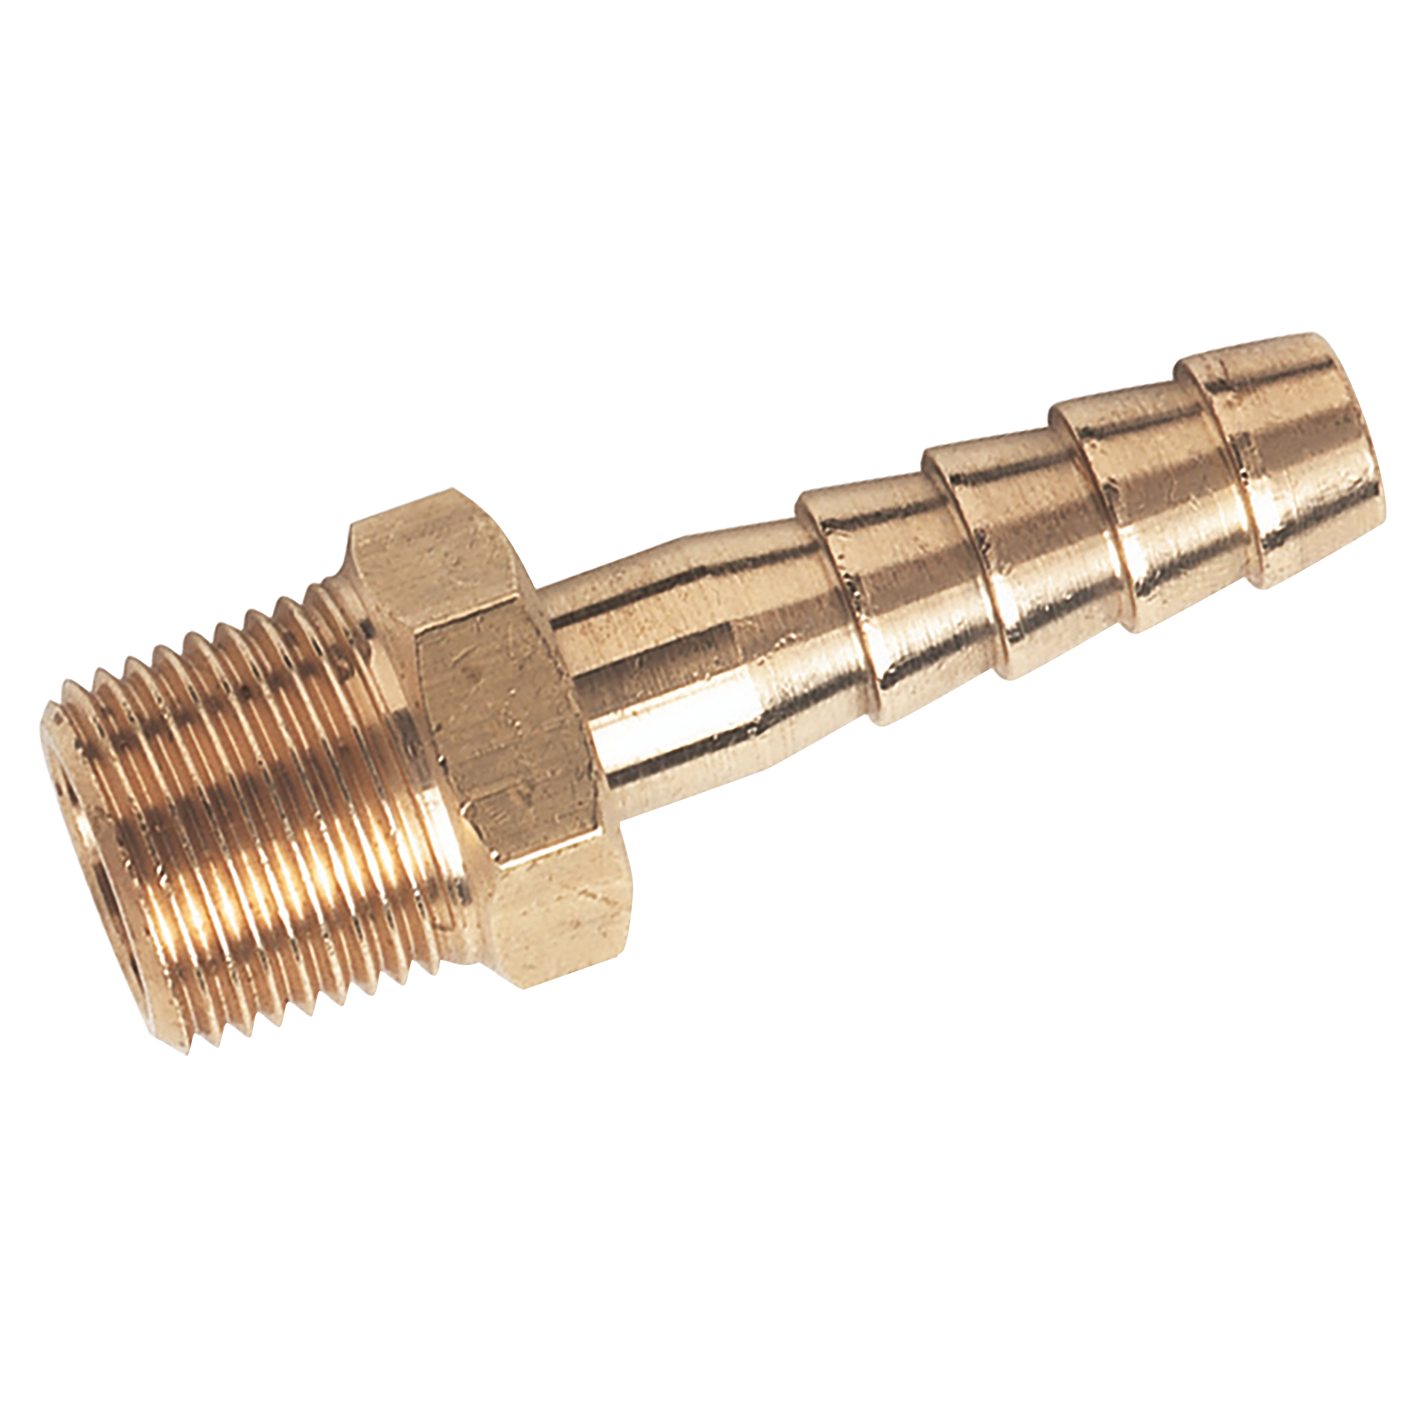 1.1/4" BSPT Male Straight Hose Tails, Brass